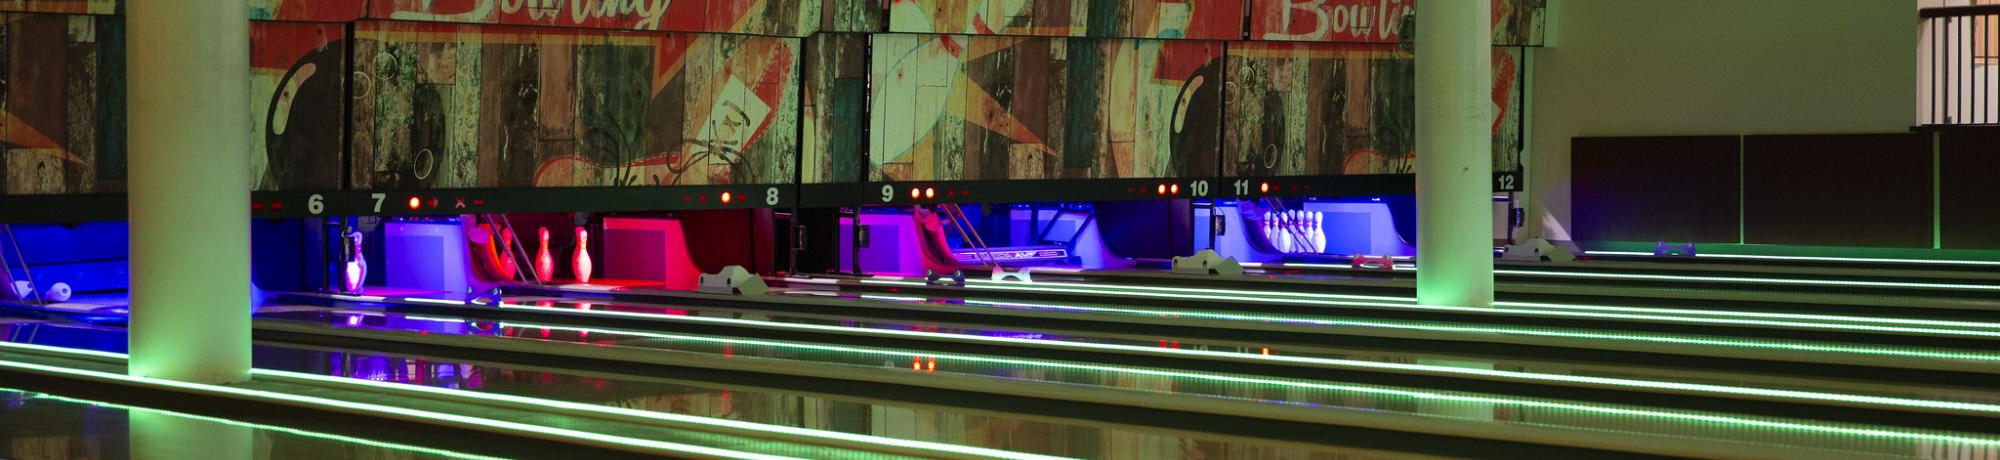 the games area bowling alley lanes with colorful led lights